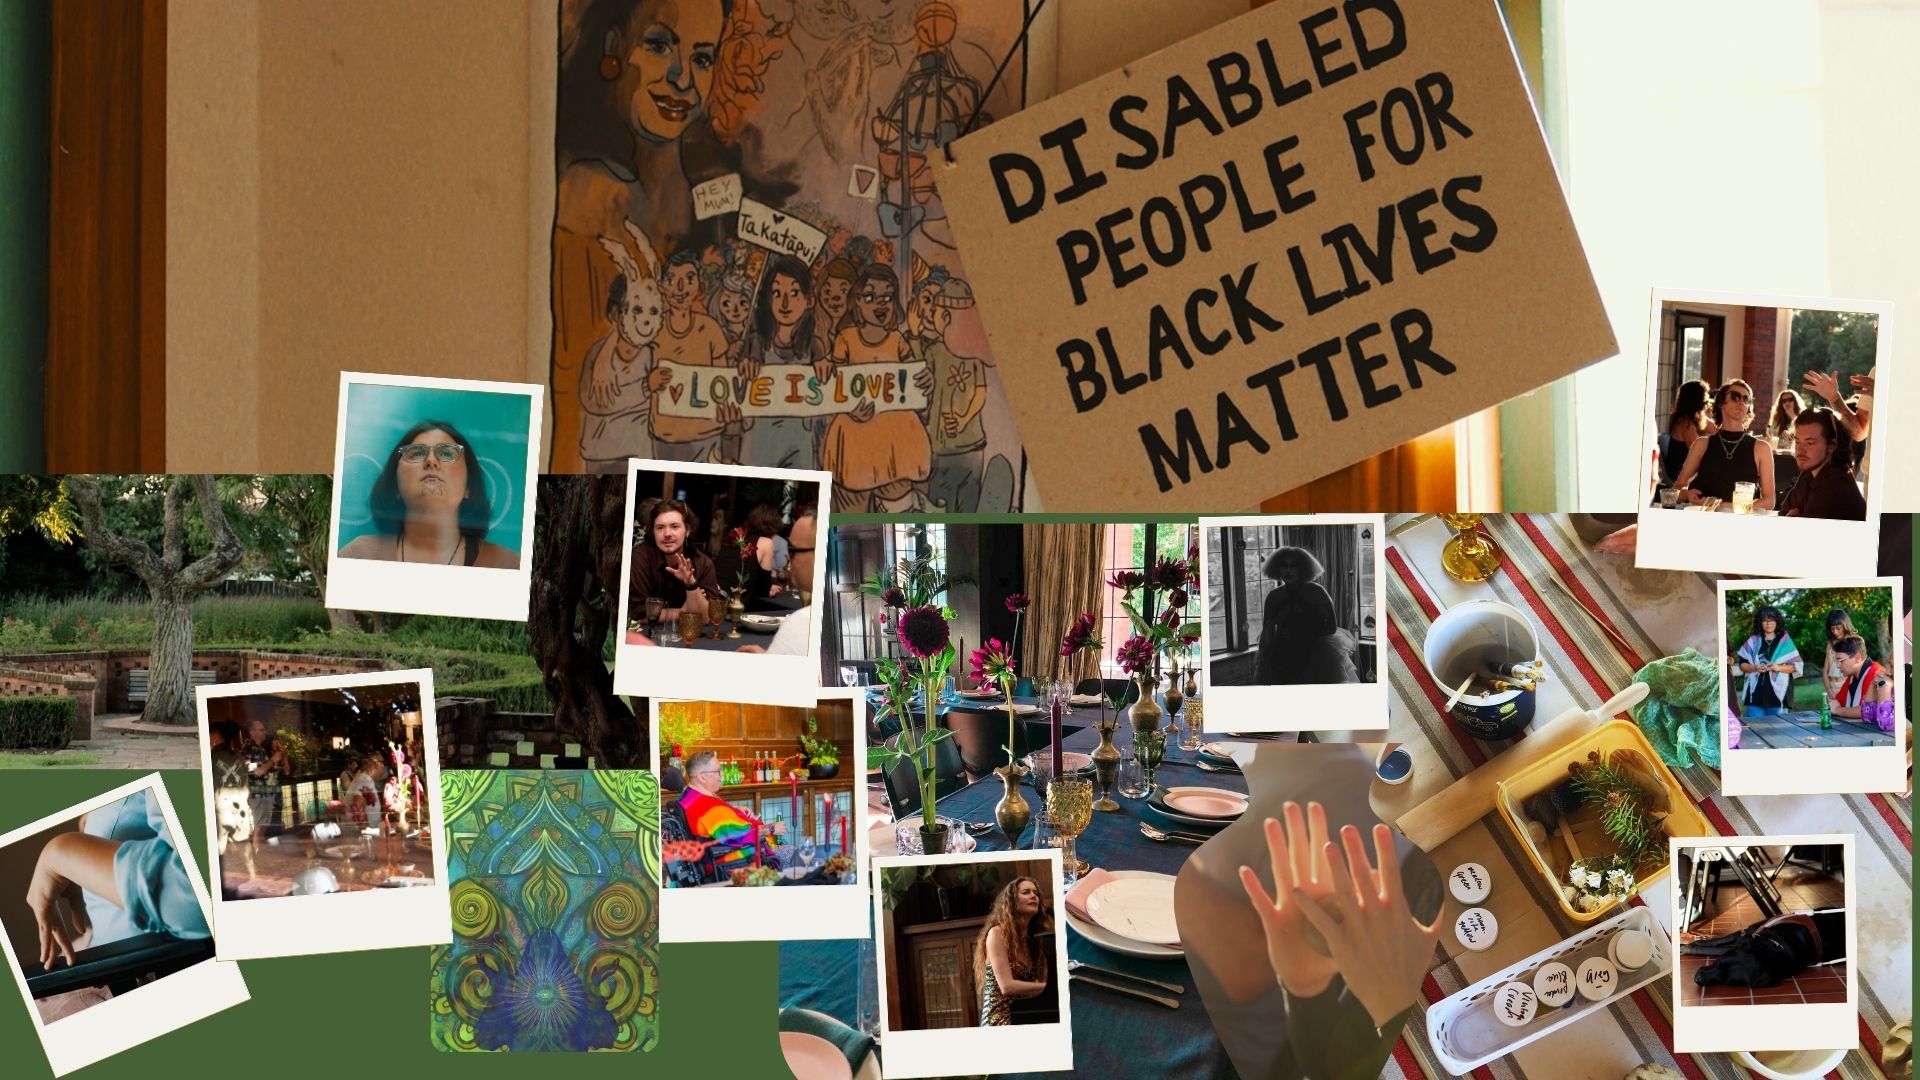 A collage of images of the activations and content for Deepen* including table settings, faces and hands against a backdrop of a sign reading 'Disabled people for black lives matter'.